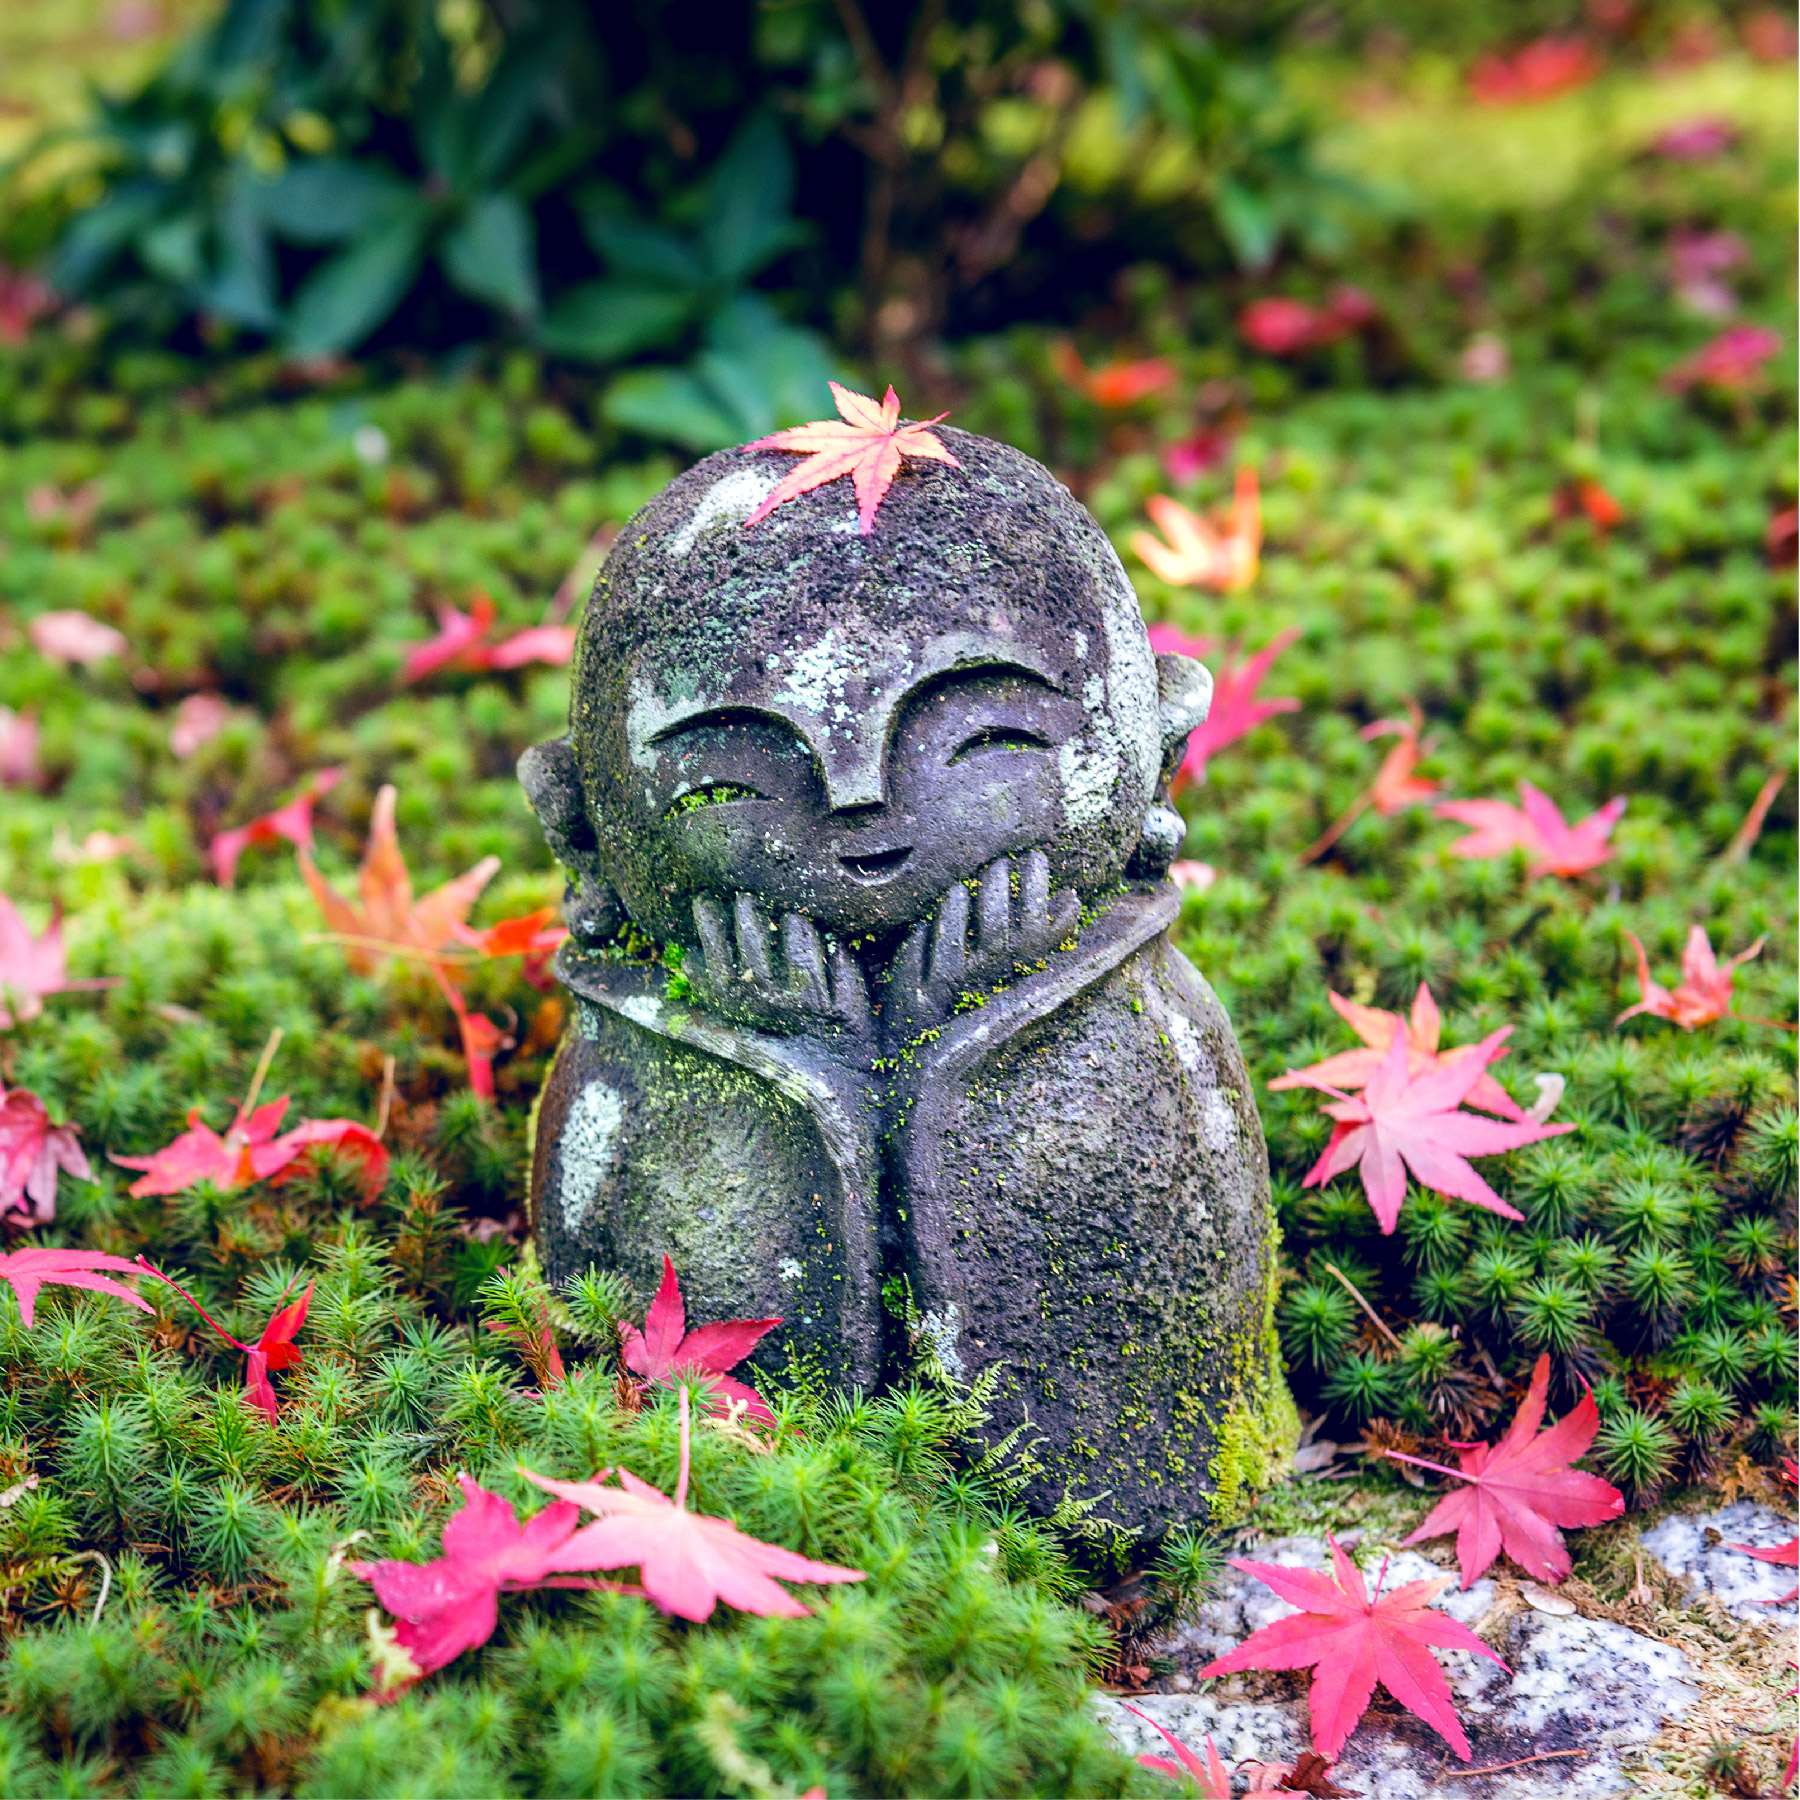 Stone Budda Statue in garden with pink flowers